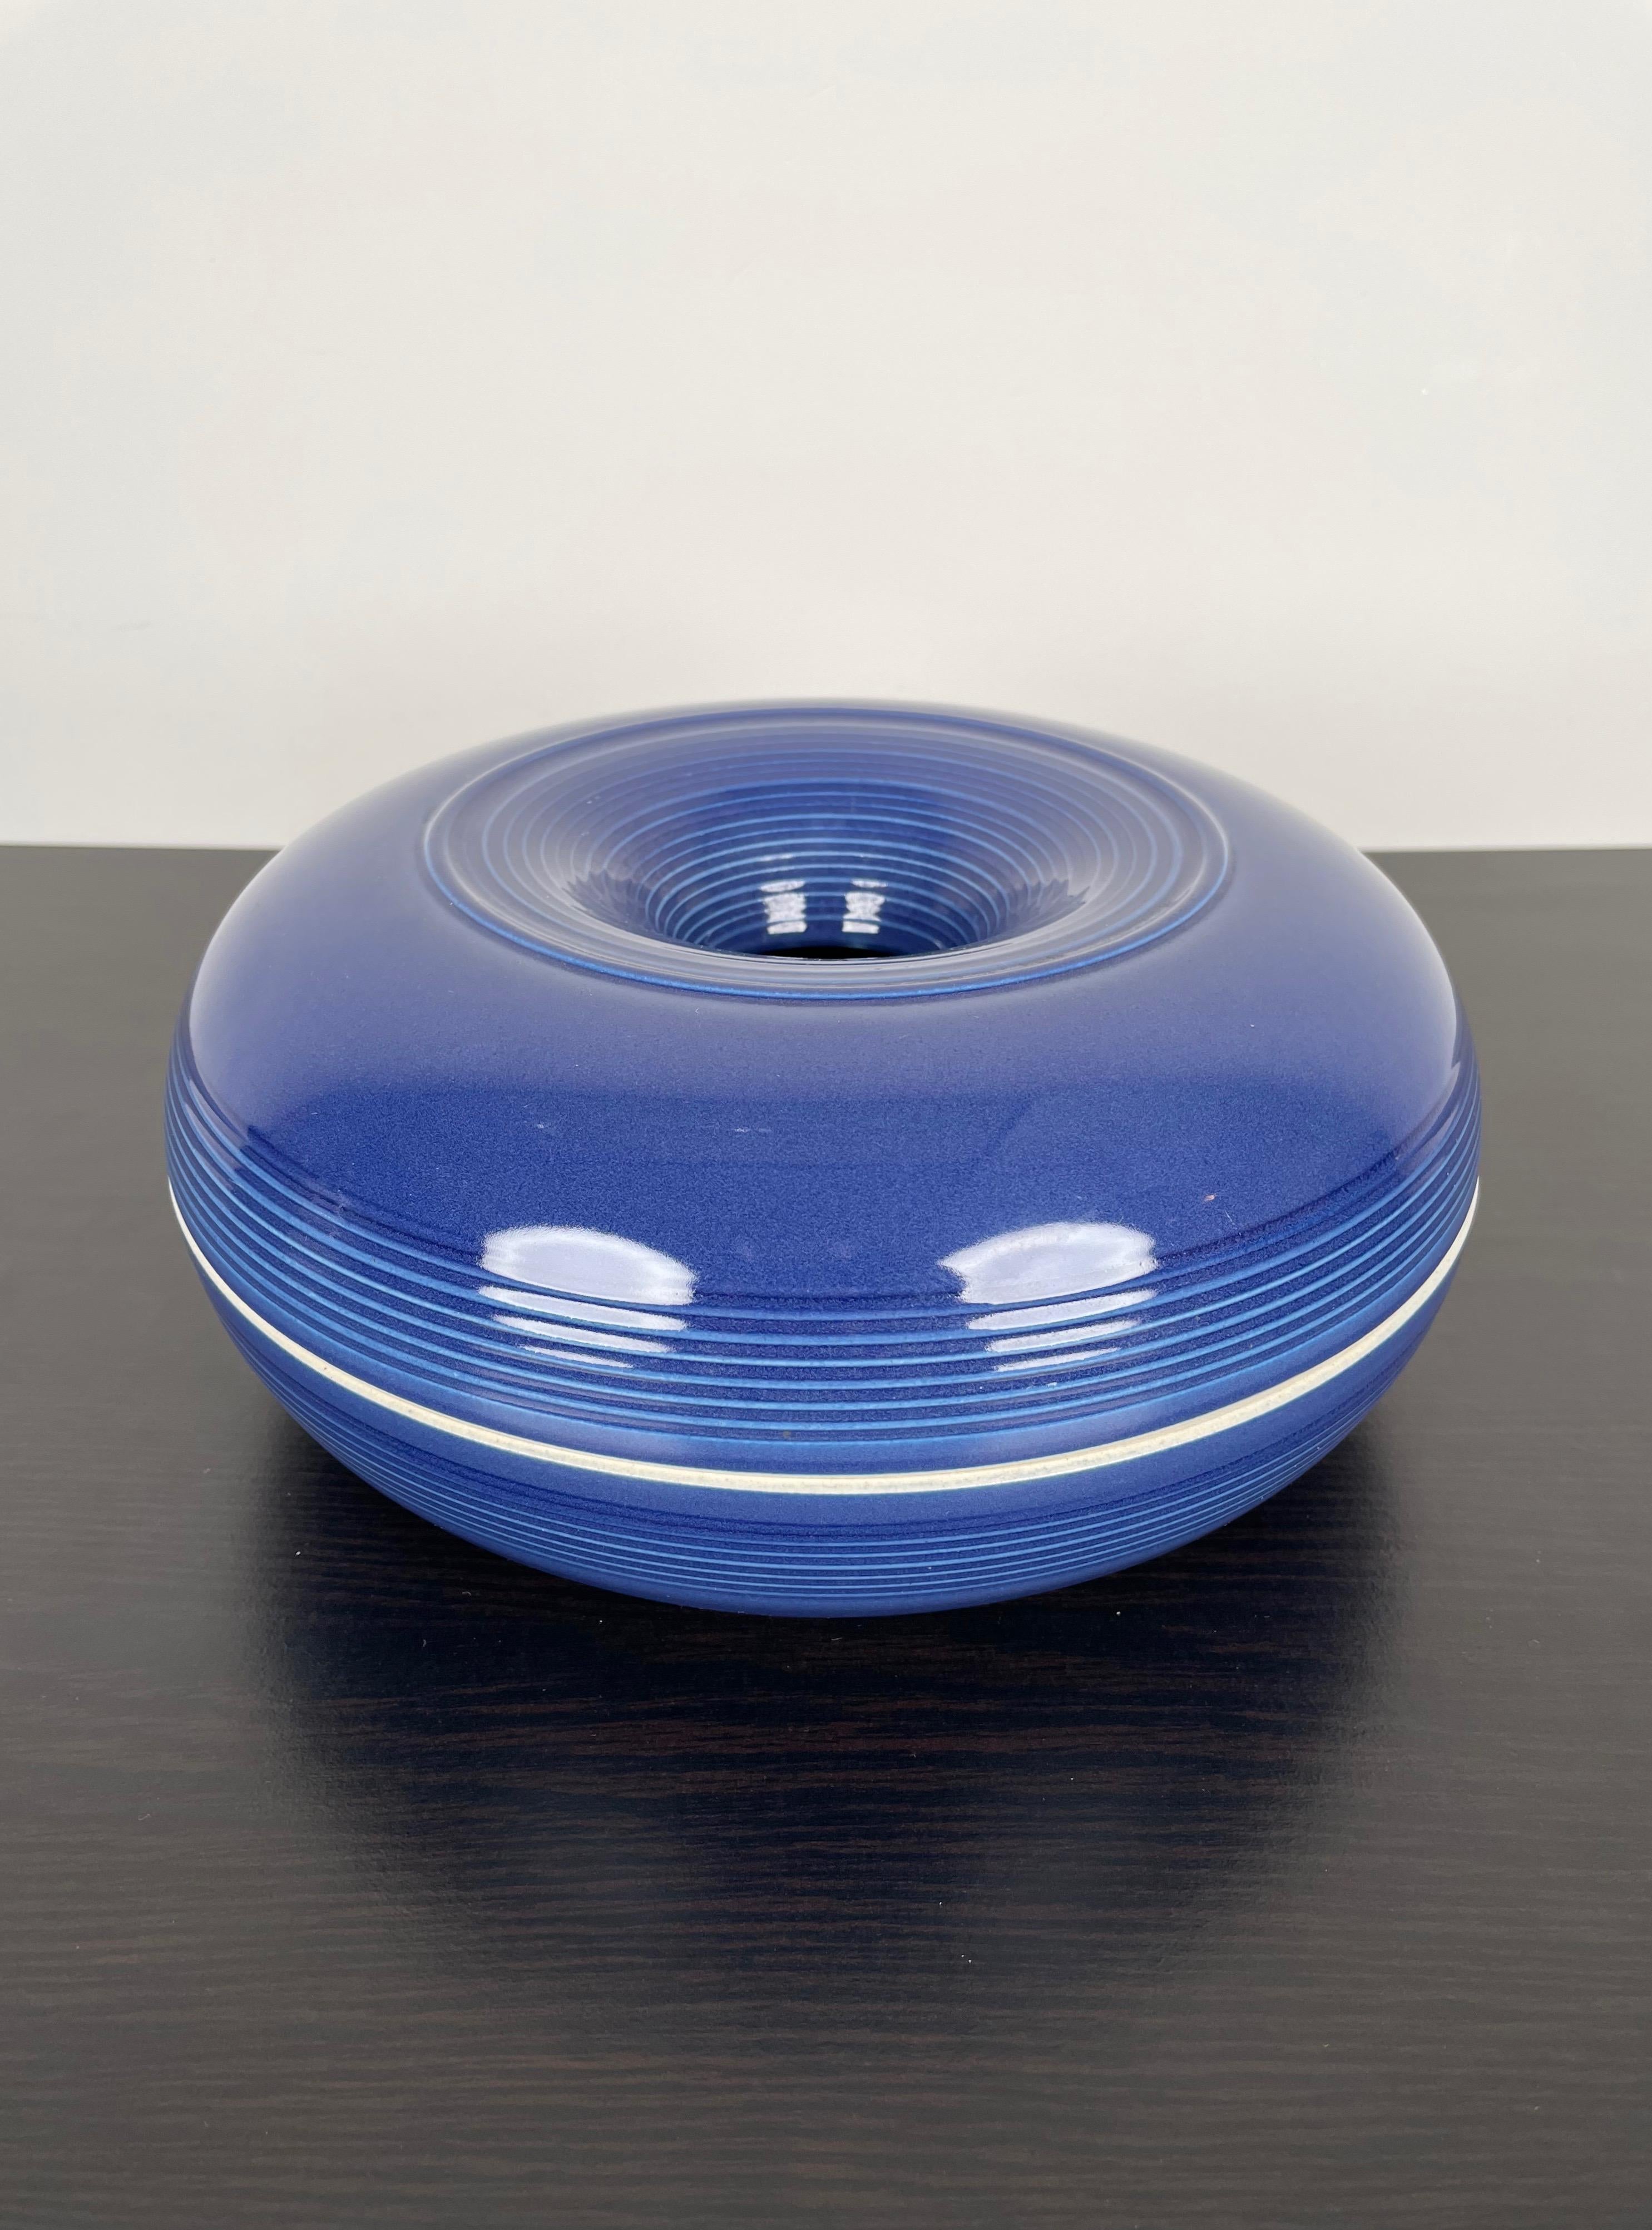 Blue violet ceramic ashtray made in Italy in the 1970s by the Italian designer Franco Bucci for Laboratorio Pesaro. 
The original label is still attached on the bottom of the ashtray.